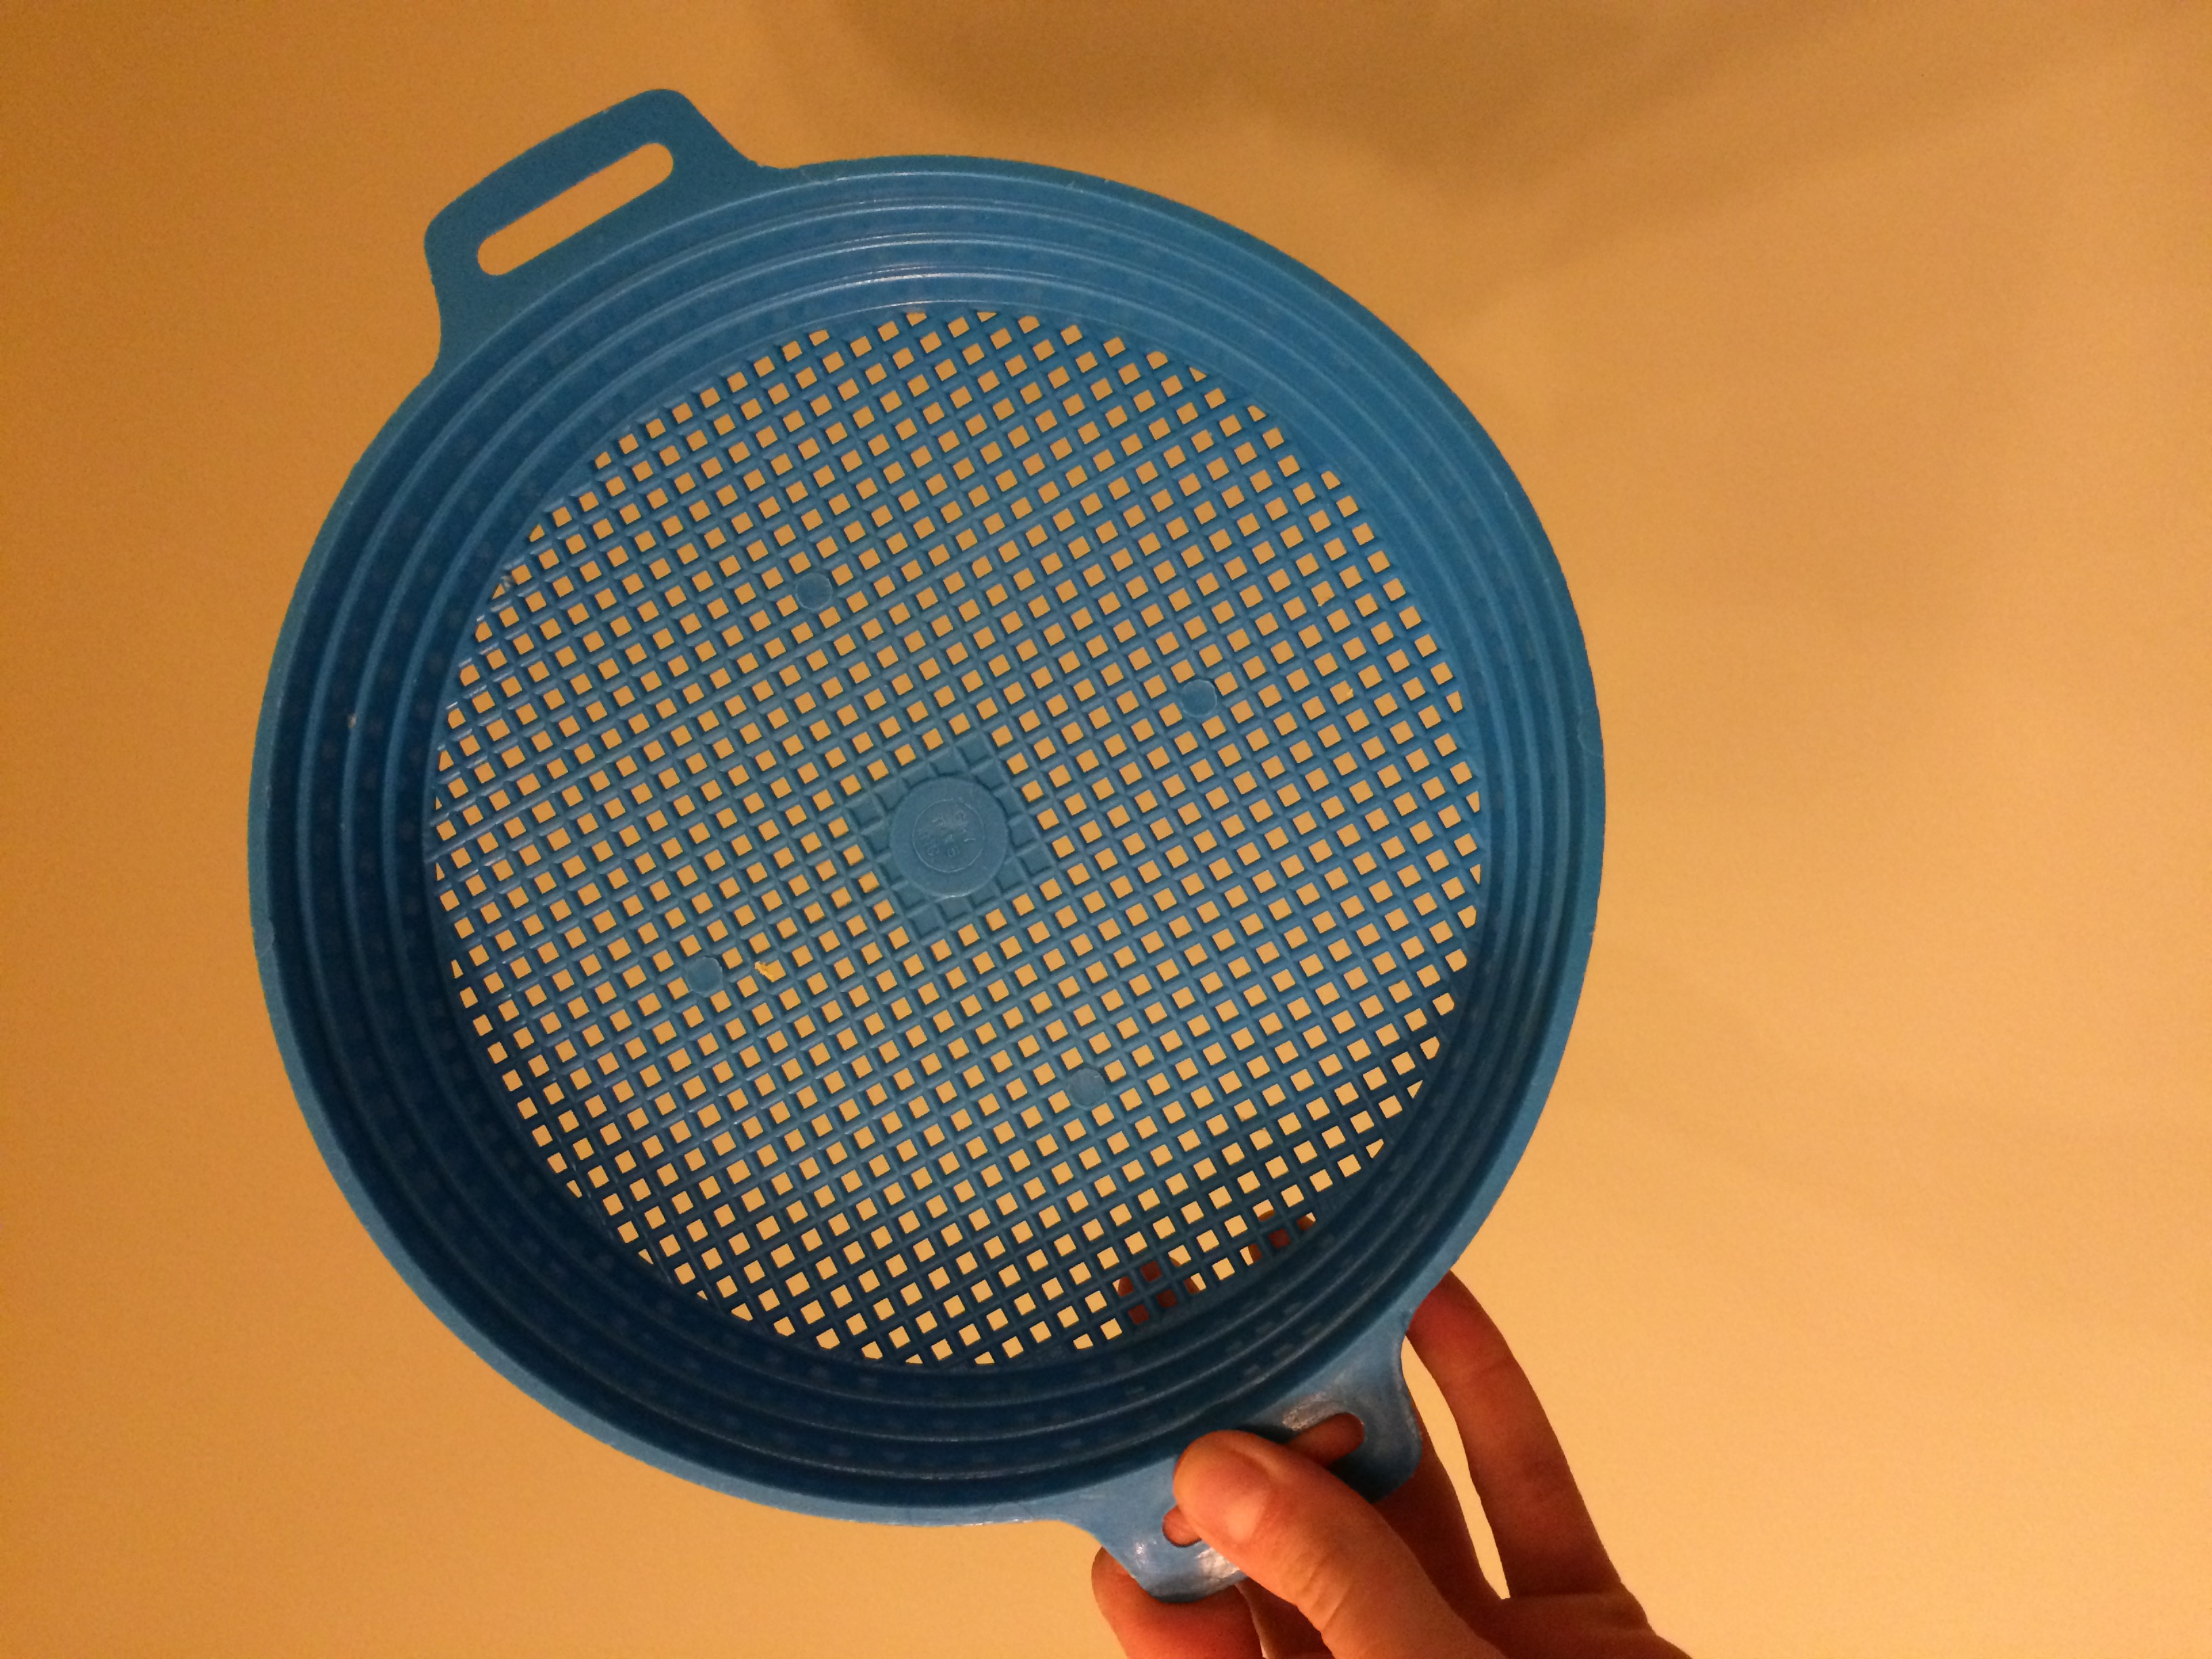 Plastic strainer used to strain the curds from whey